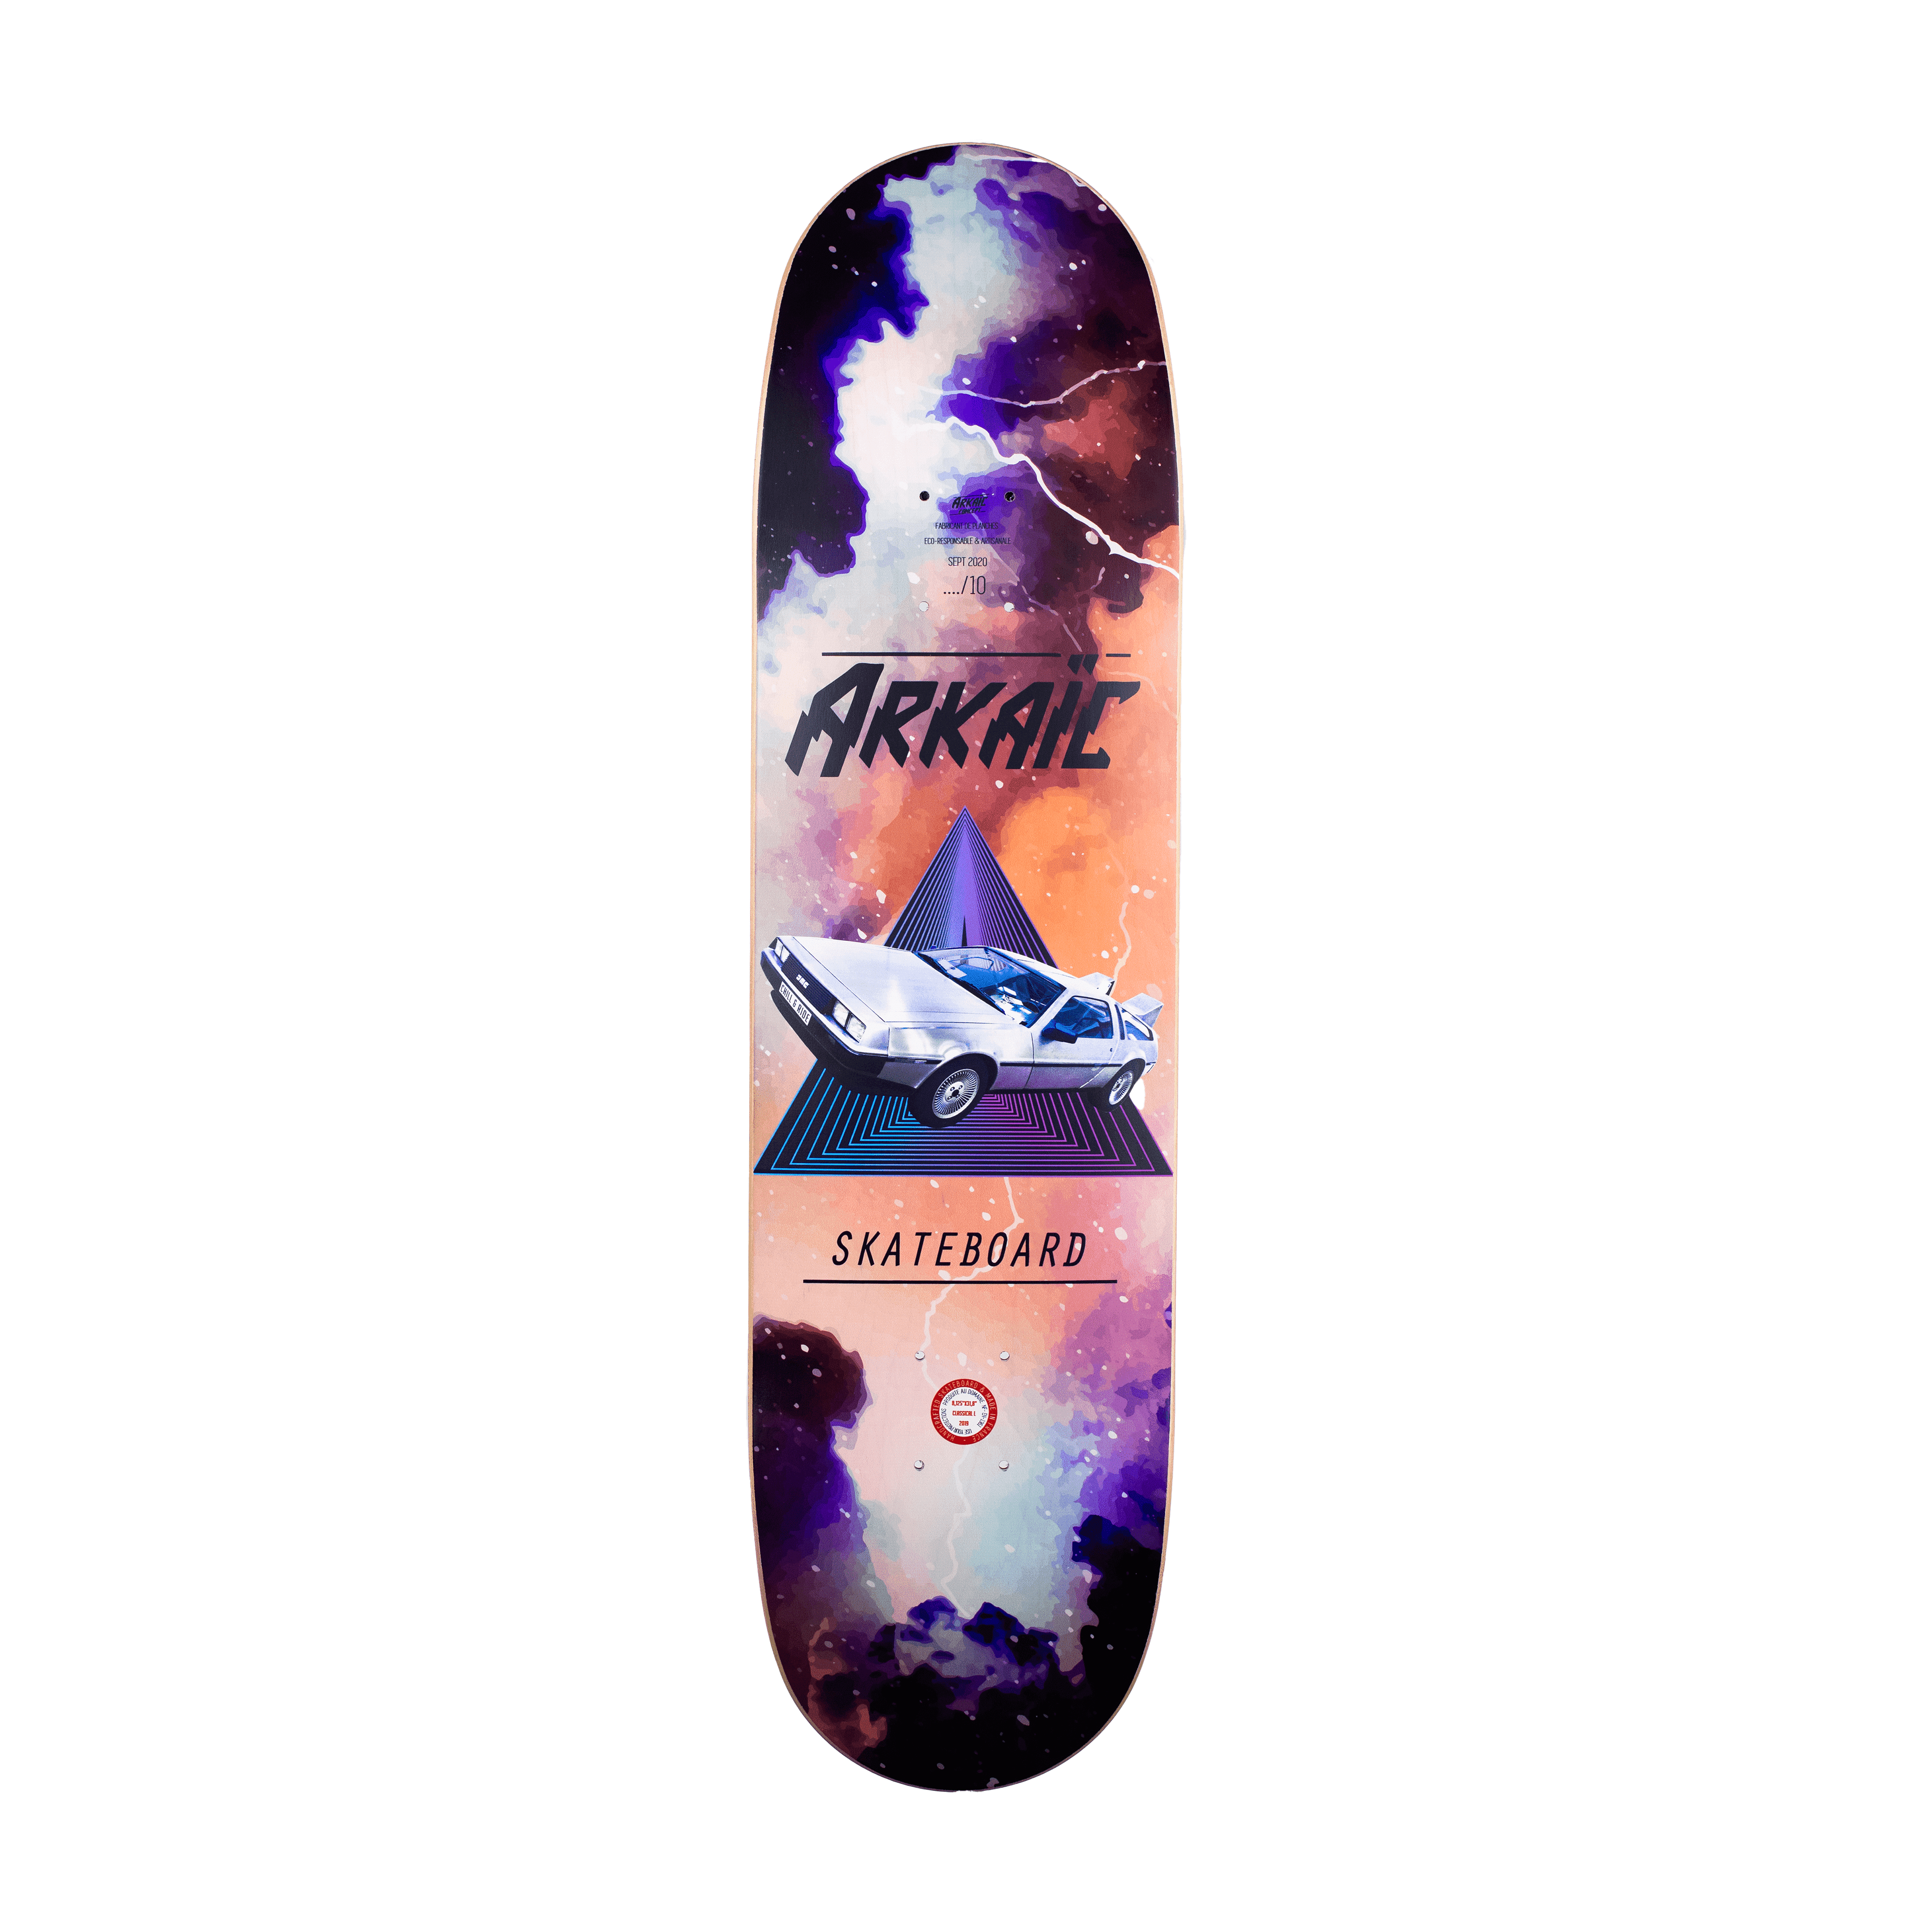 Arkaic Skateboard made in france collection 2020 pandemic edition fabrication francaise lyon eco-responsable11